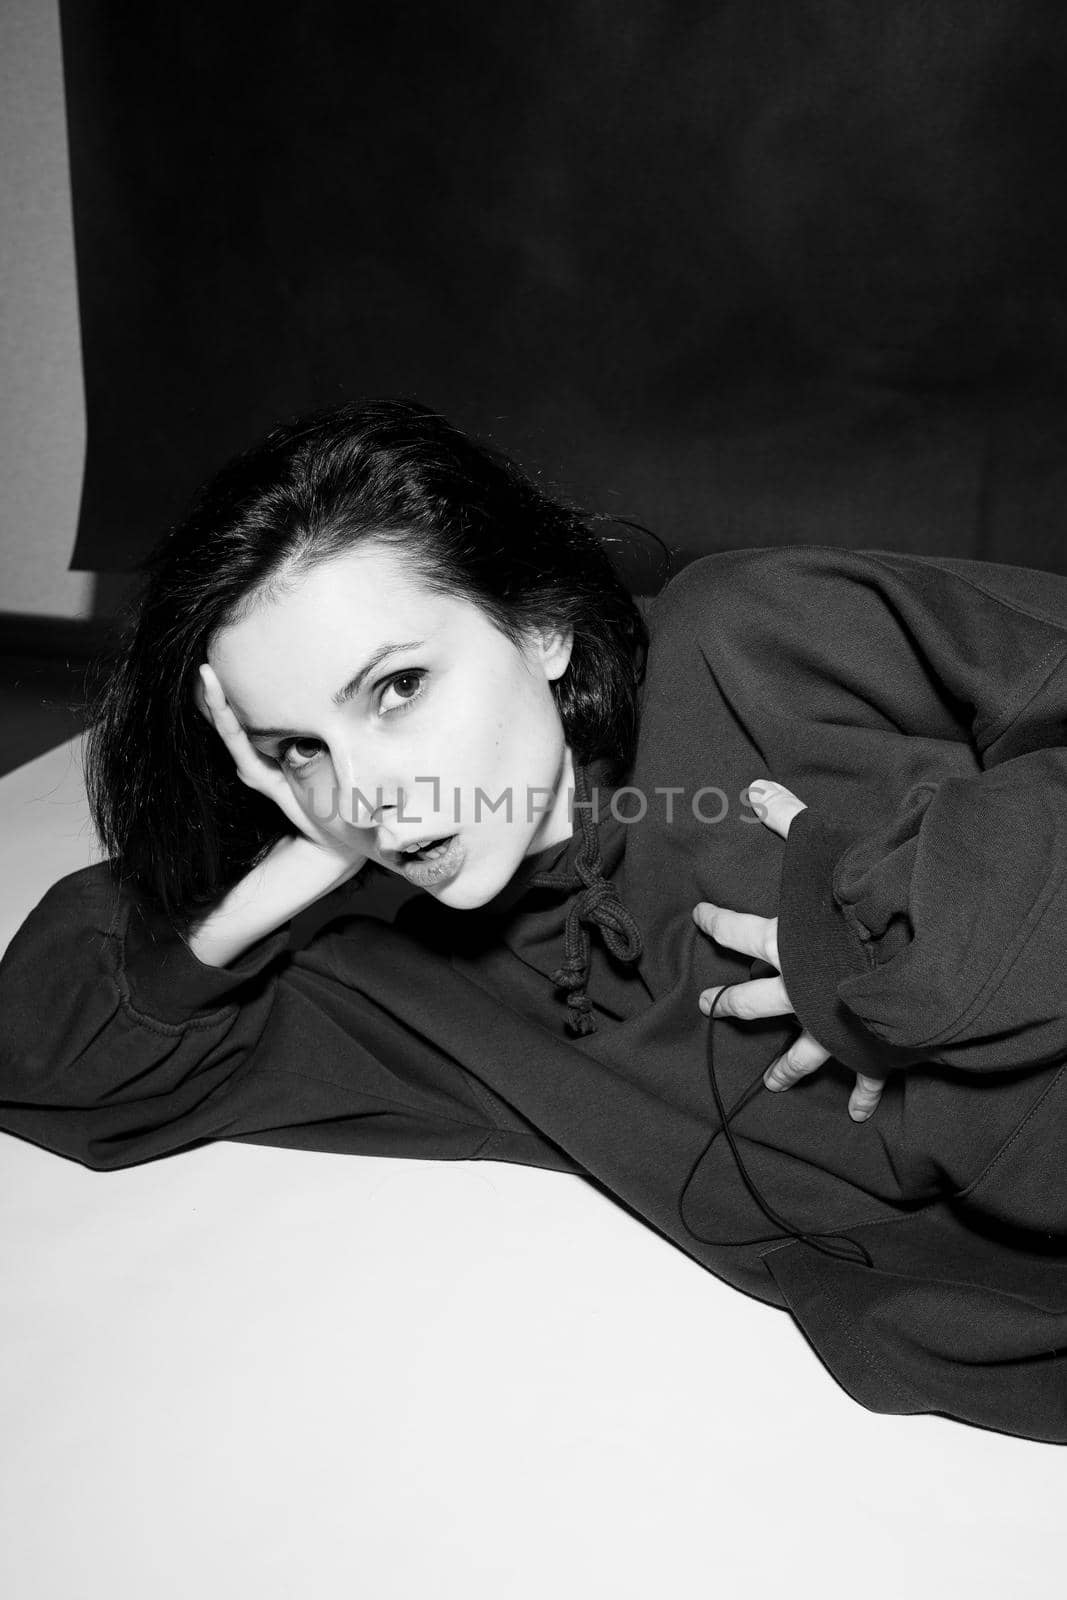 a woman in a black hoodie lies on the floor, black and white photography by shilovskaya